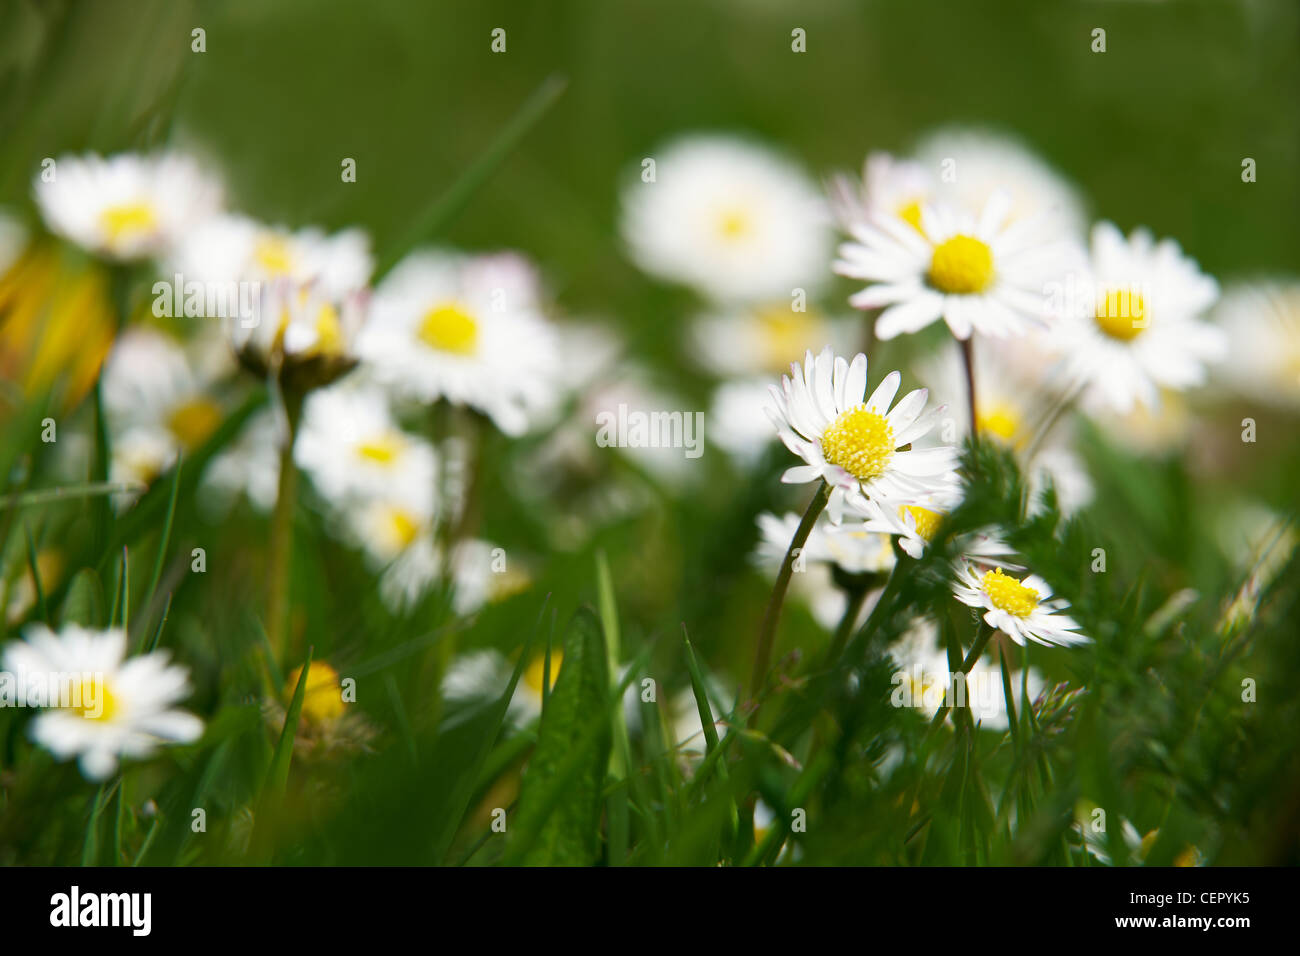 Close-up of Daisies growing in grass. Stock Photo